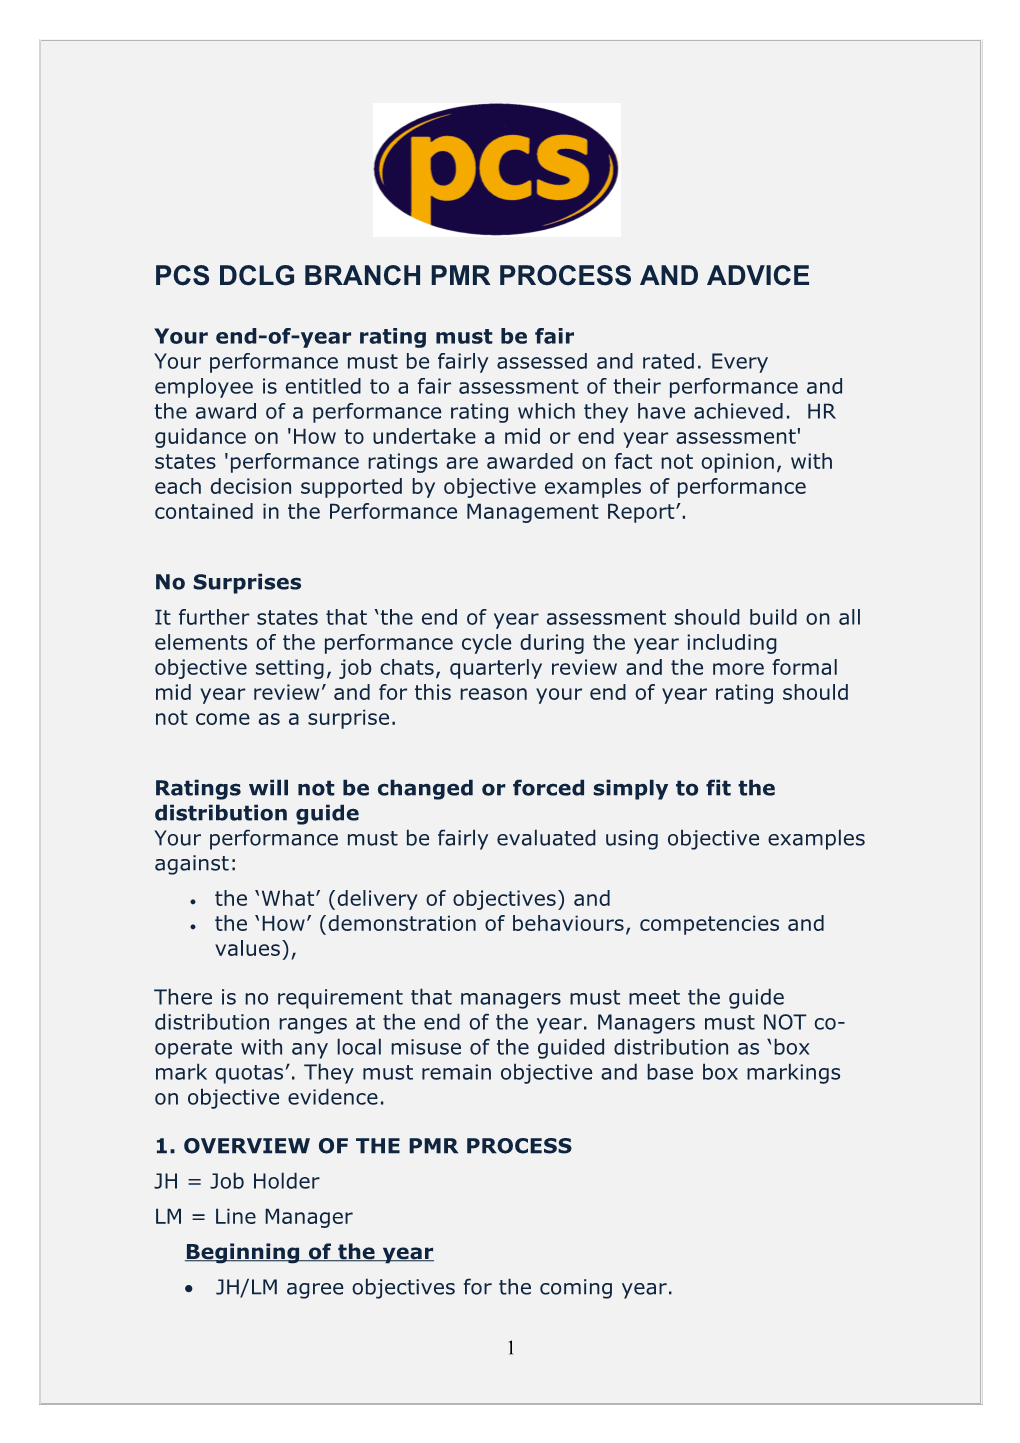 Pcs Dclg Branch Pmr Process and Advice